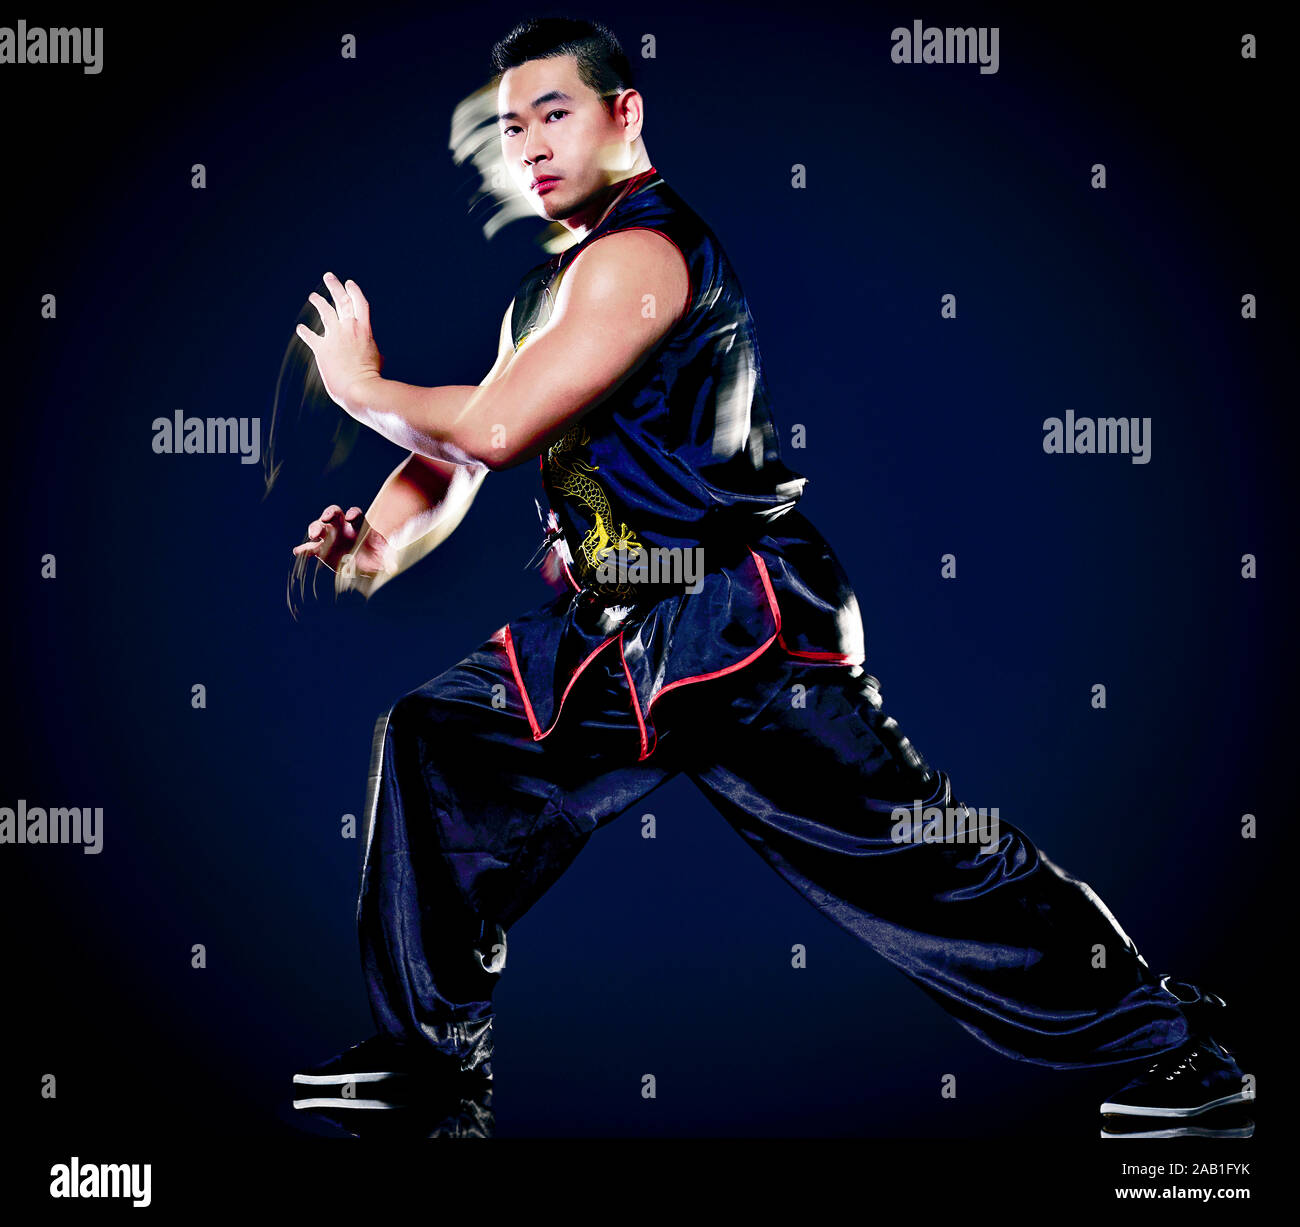 wushu chinese boxing kung fu Hung Gar fighter isolated man isolated on  black background with speed light painting effect motion blur Stock Photo -  Alamy